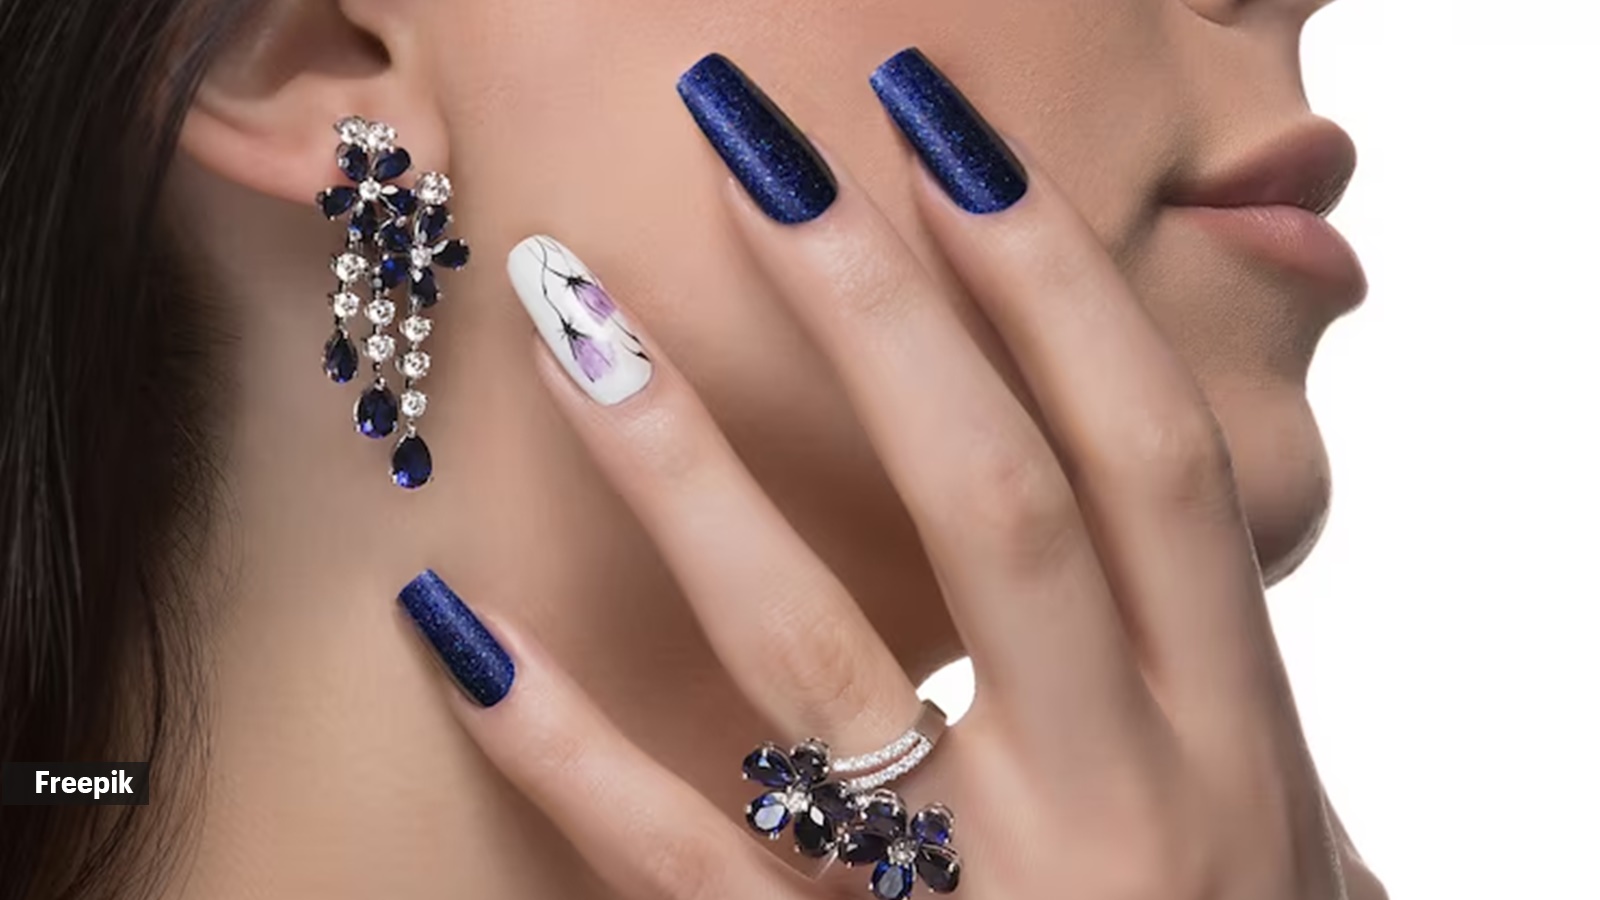 http://www.theistylelounge.com Best nail art in chandigarh. | Cool nail  art, Nails, Nail art